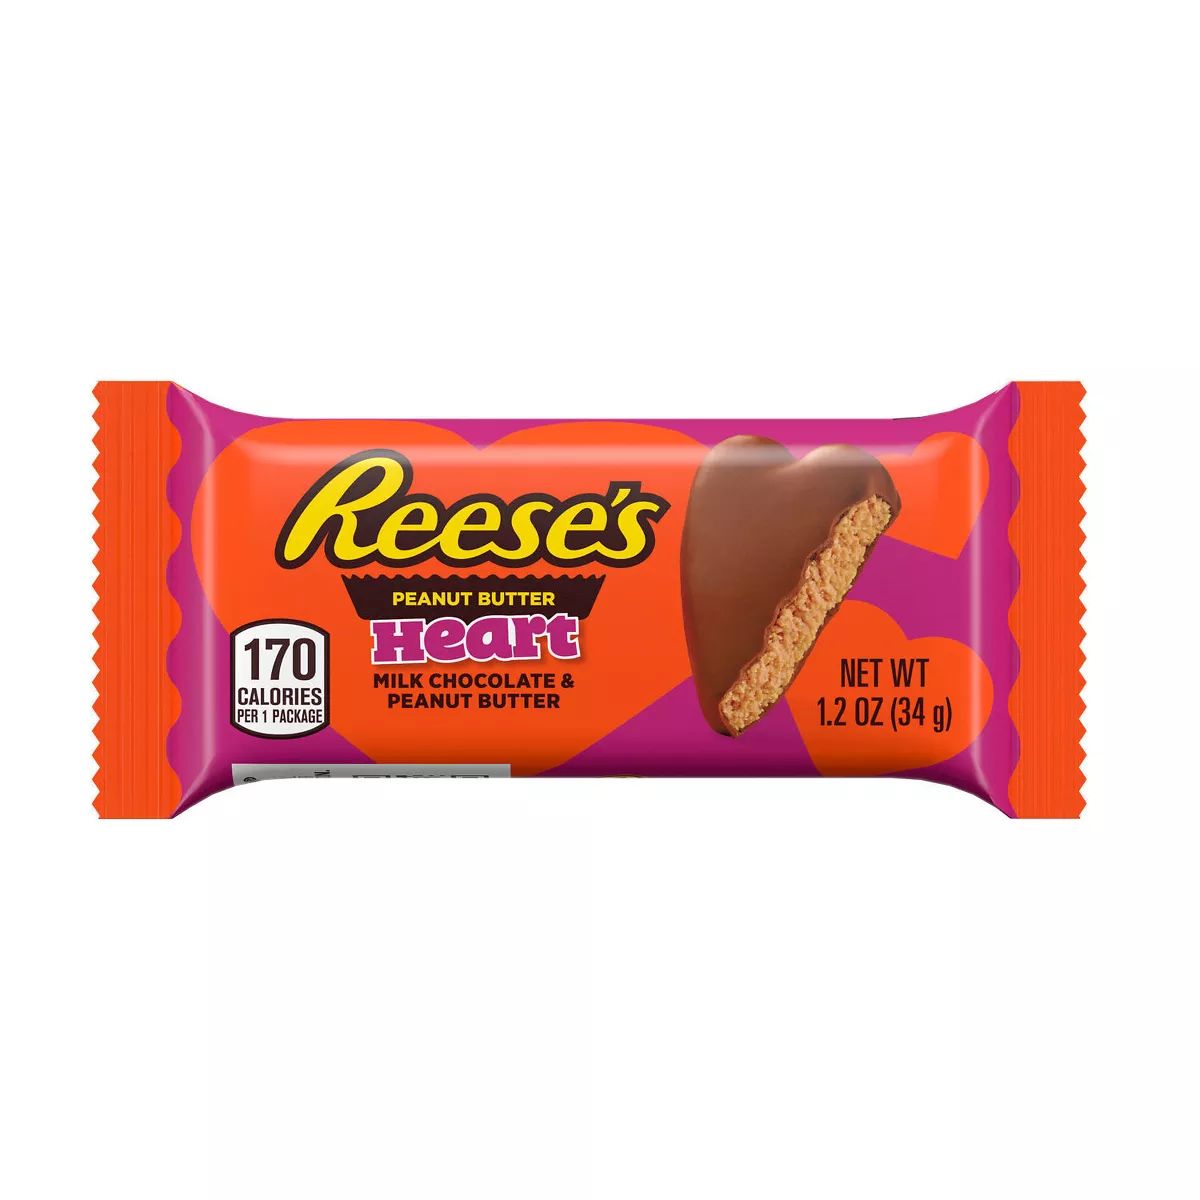 Reese's Valentine's Day Peanut Butter Heart Candy - 1.2oz | Target